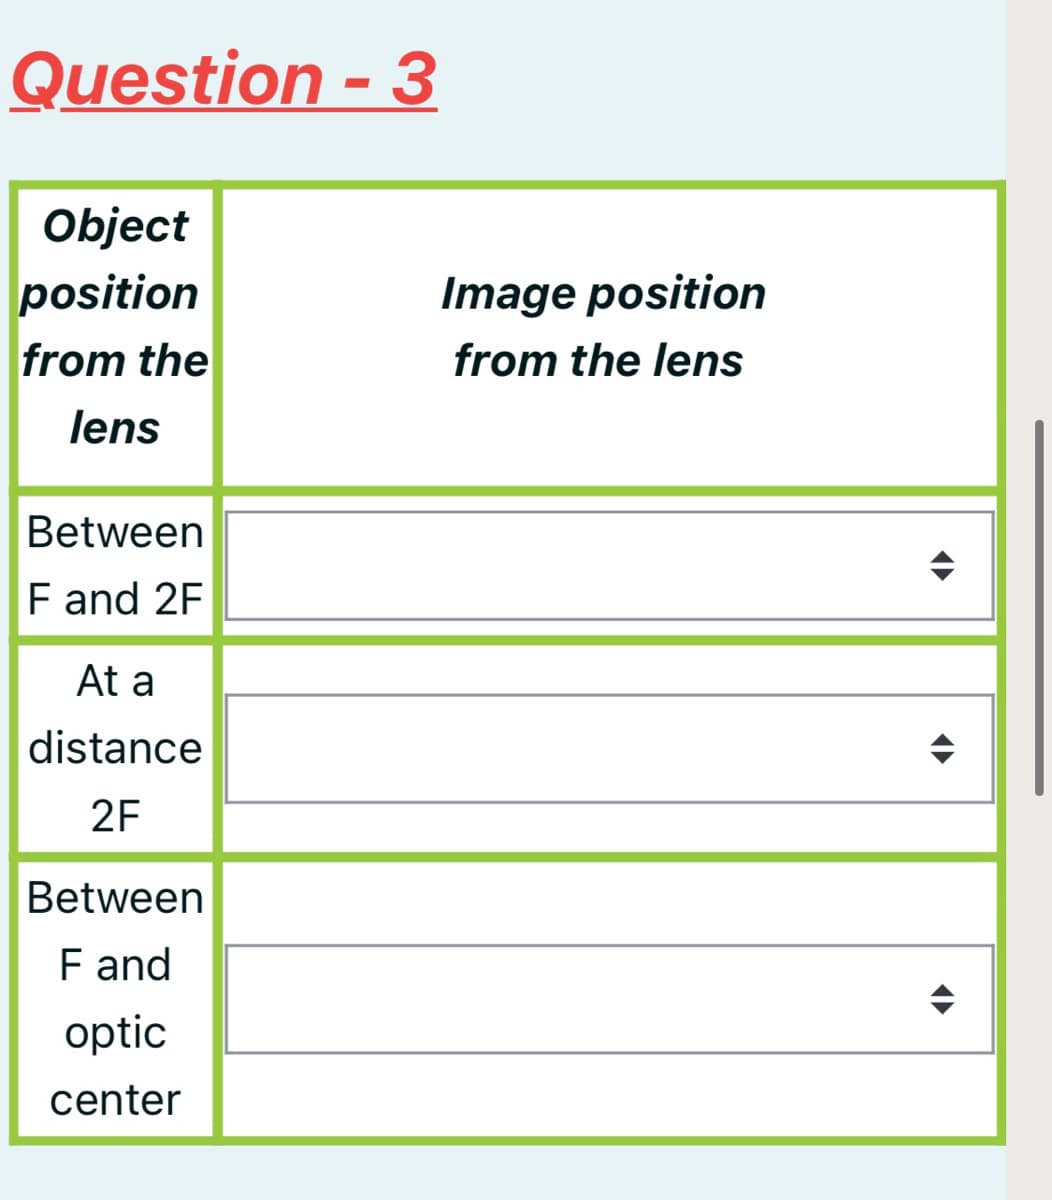 Question - 3
Object
position
Image position
from the
from the lens
lens
Between
F and 2F
At a
distance
2F
Between
F and
optic
center
